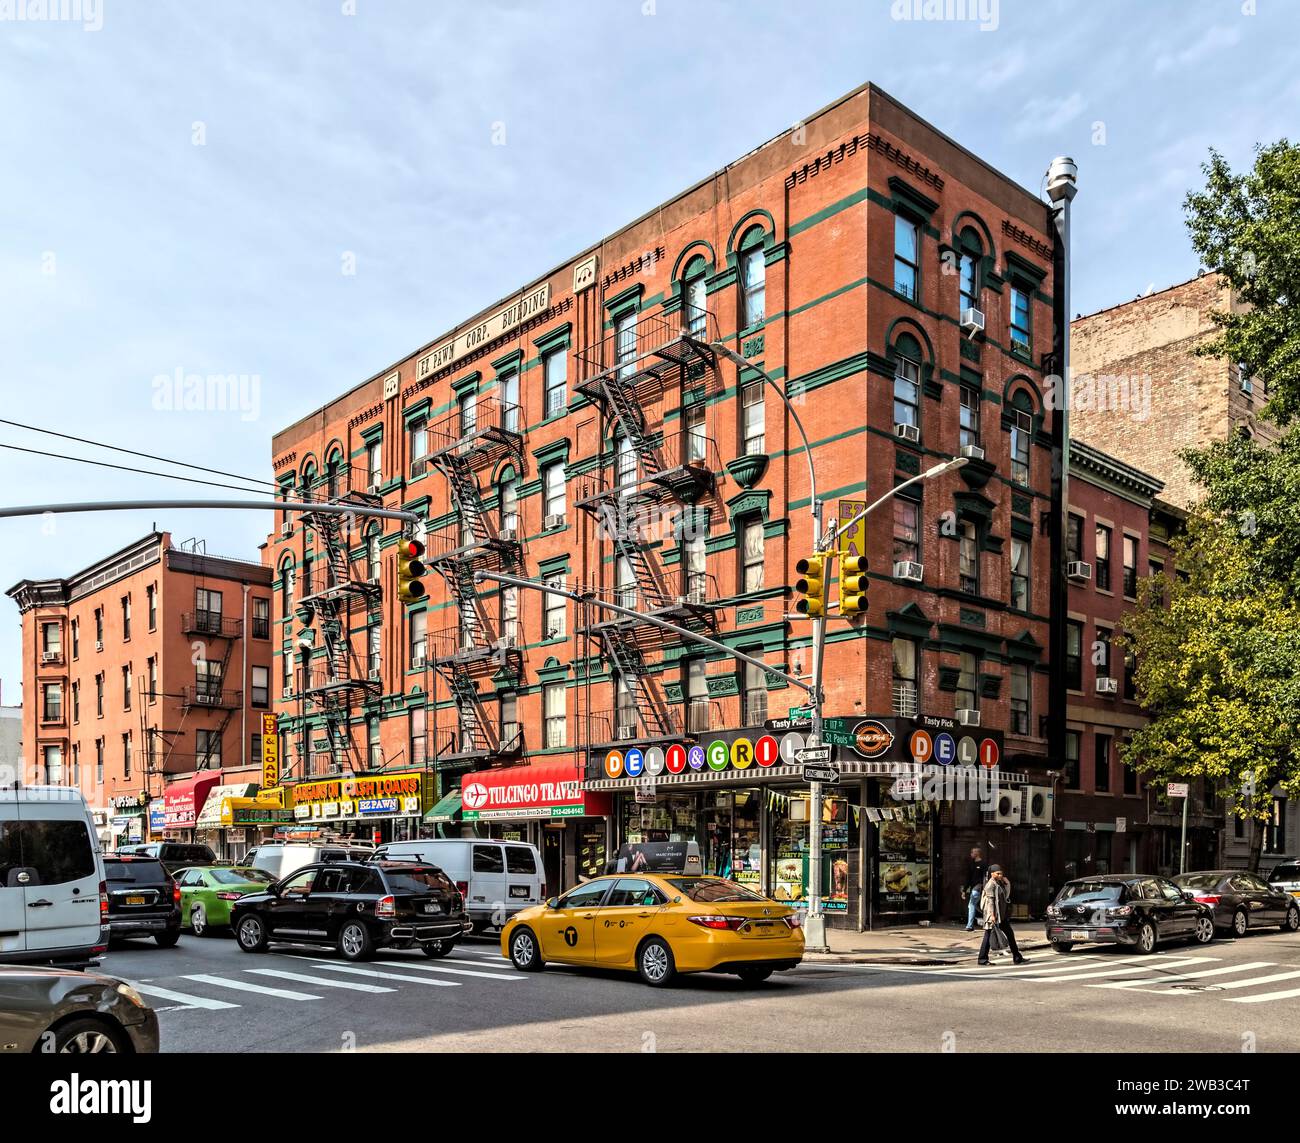 EZ Pawn Corp. Building, a five-story apartment house in East Harlem. Corner store adapted subway line designators in its sign. Stock Photo